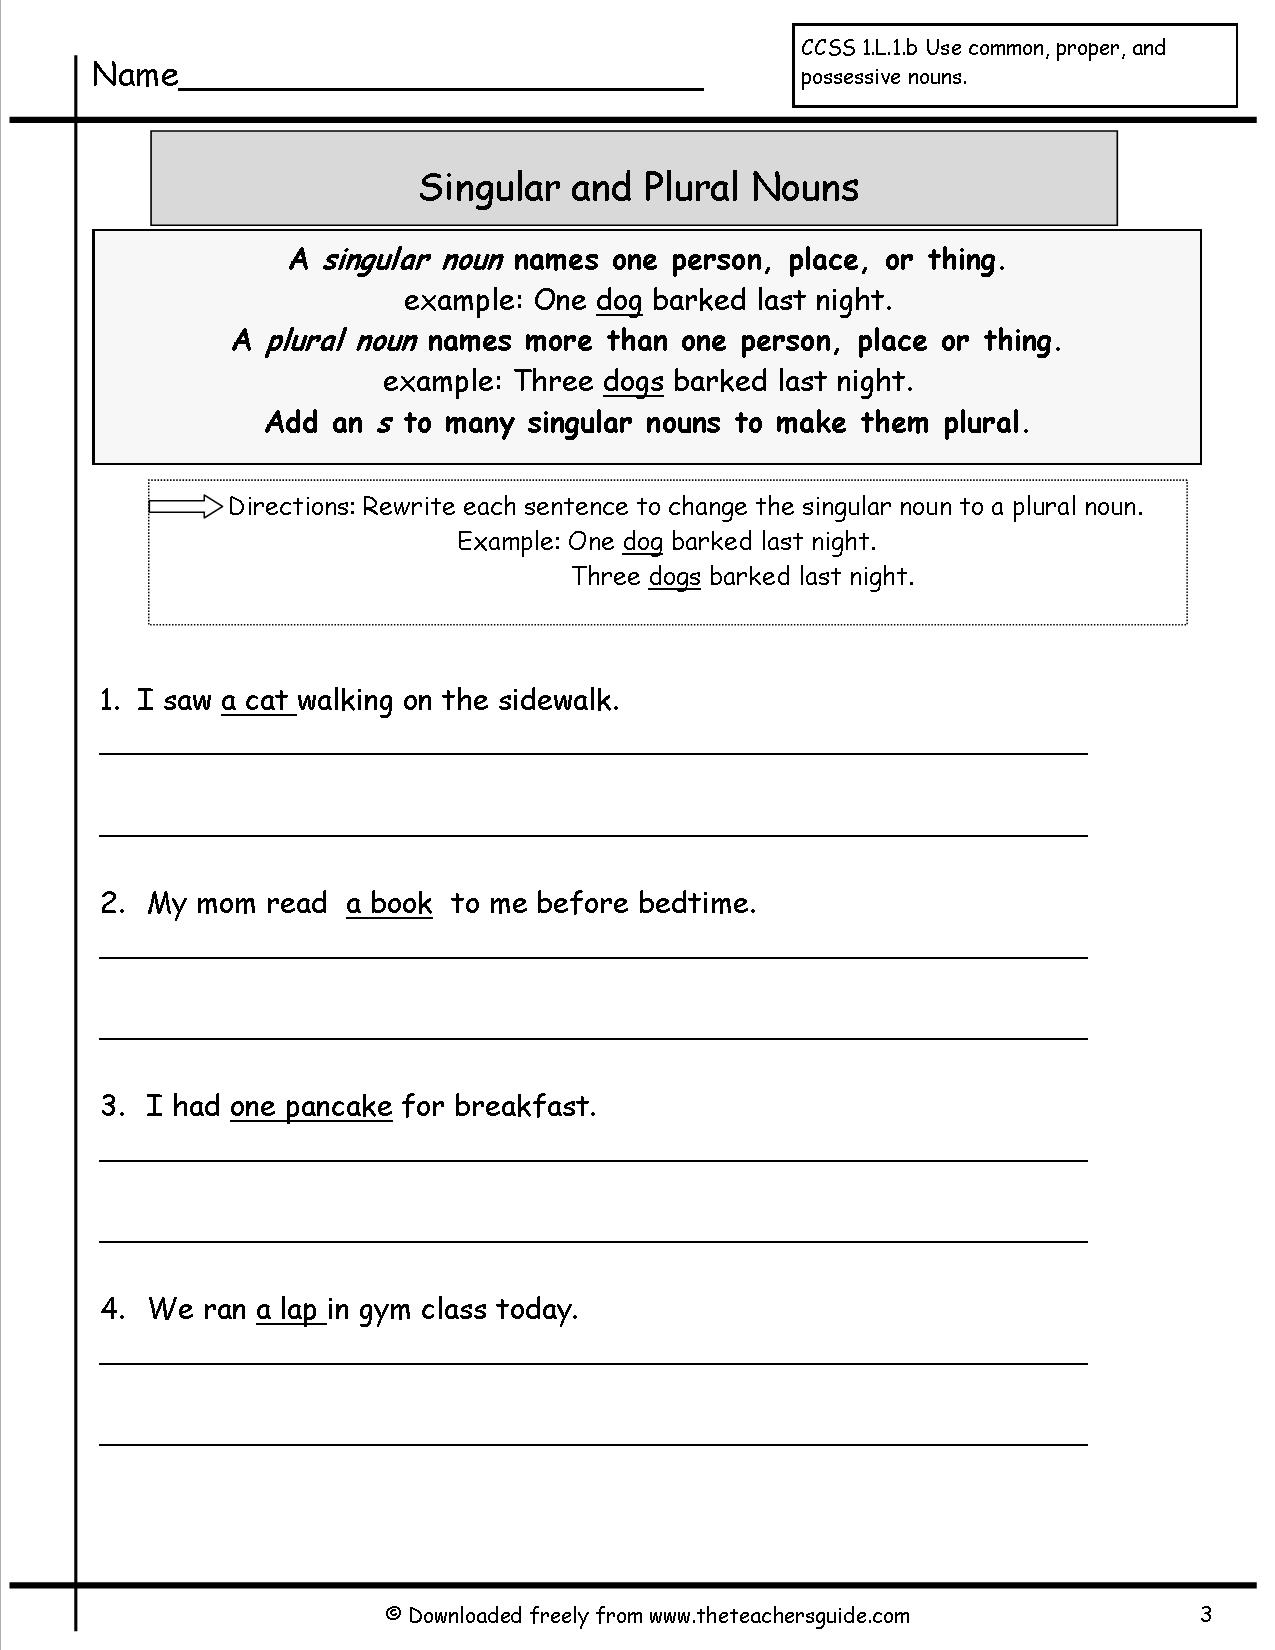 english-worksheets-for-grade-3-singular-and-plural-goimages-watch